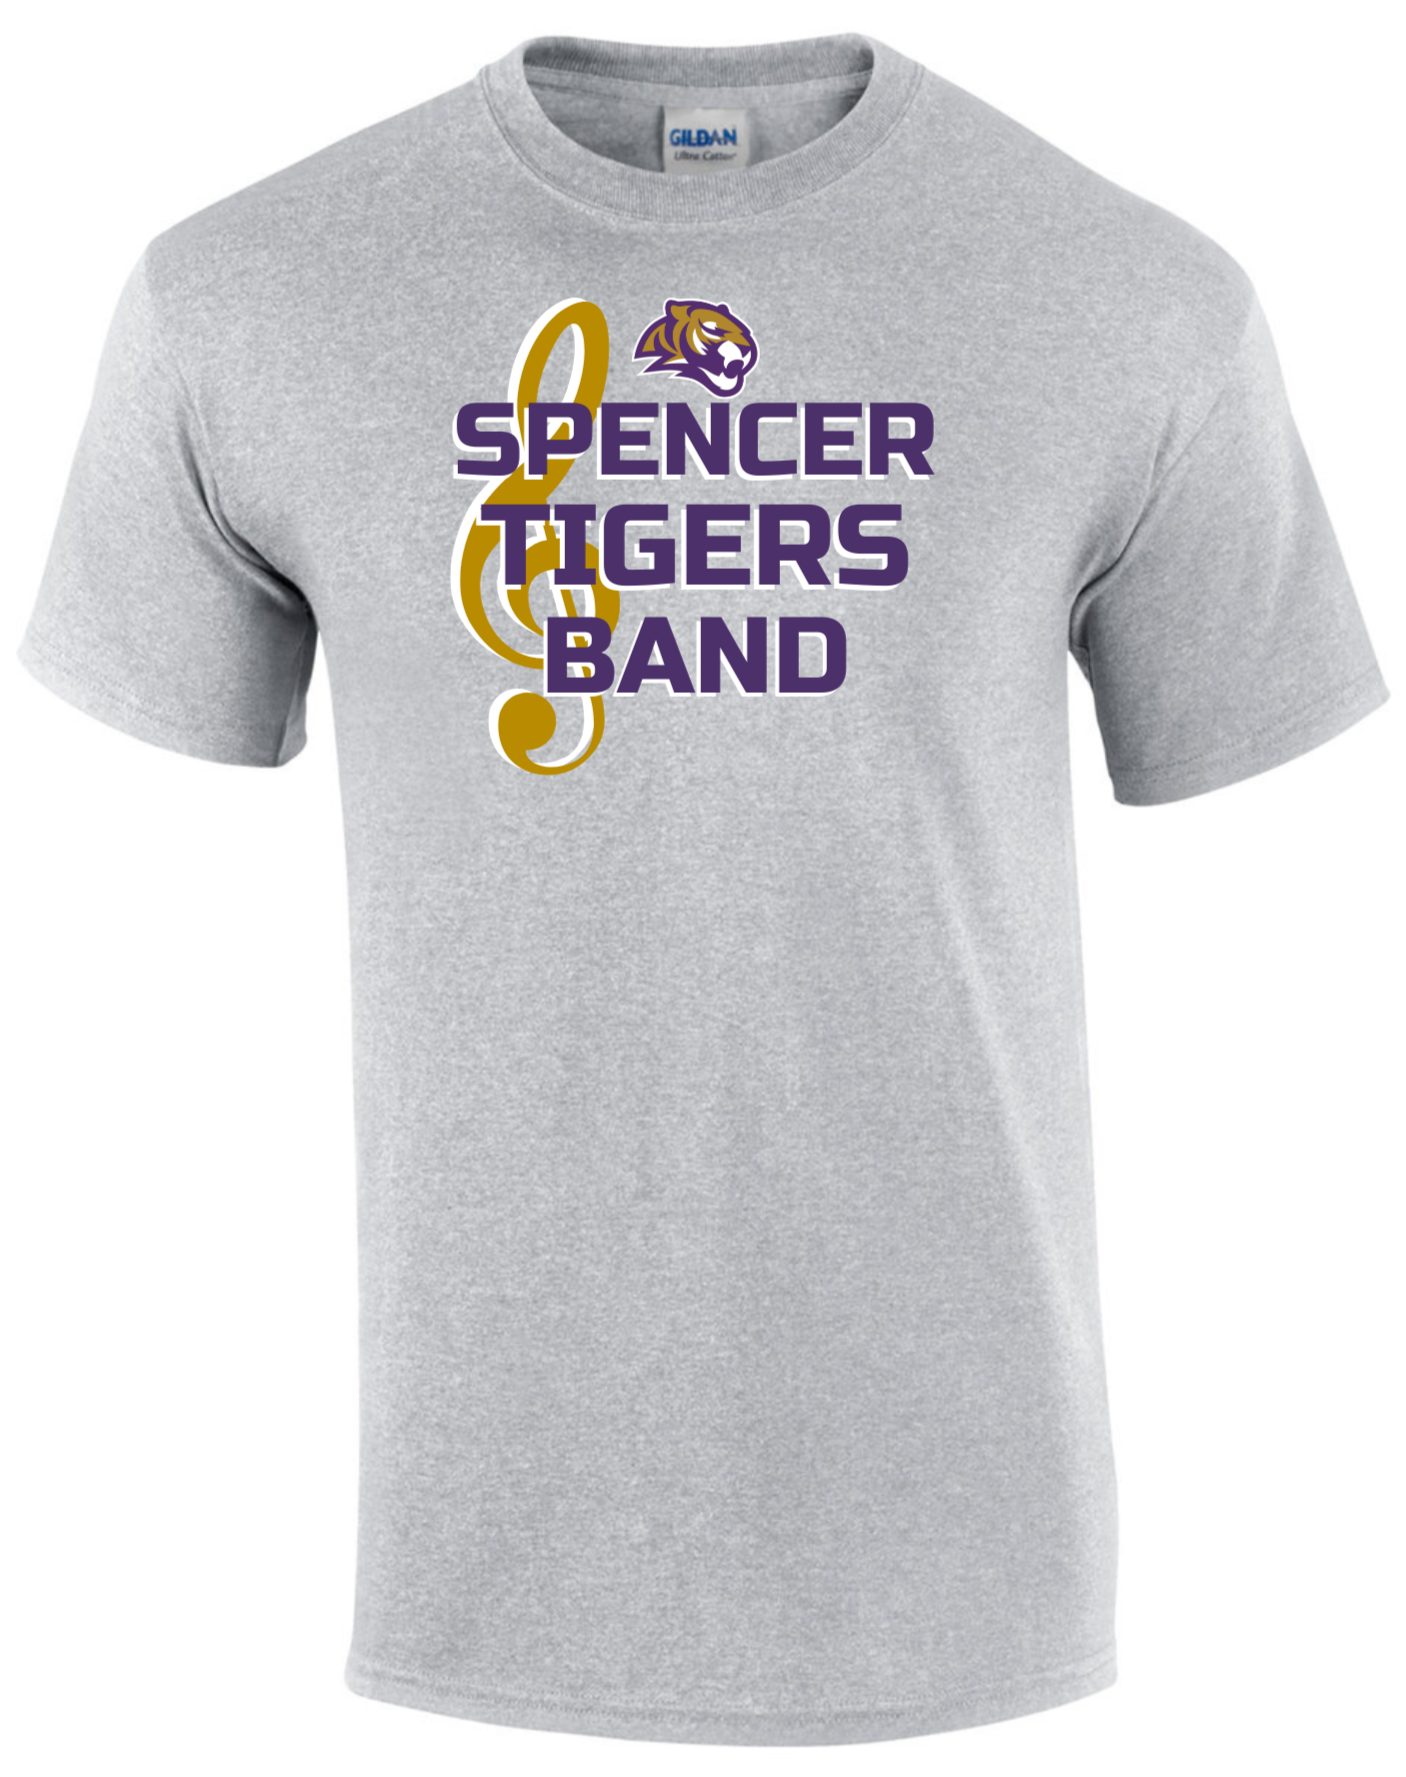 Full-Front  Spencer Tigers Band - NEW DTG